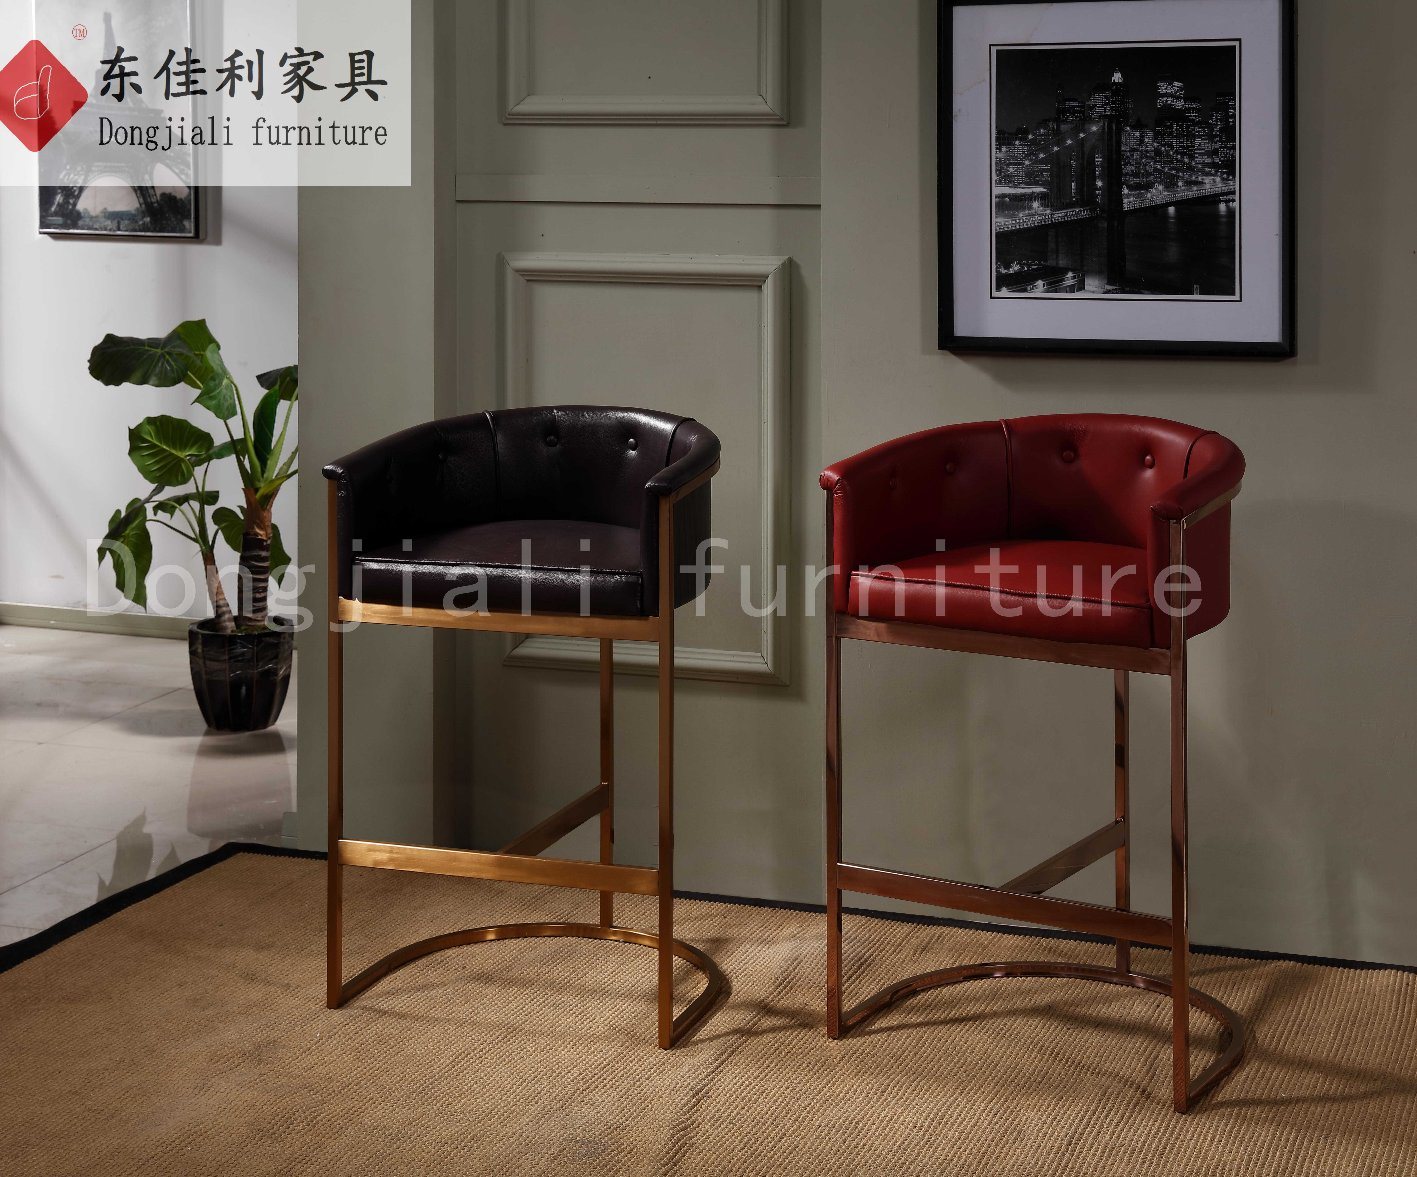 Stainless Steel Frame Bar Stool with PU and Leather Cushion